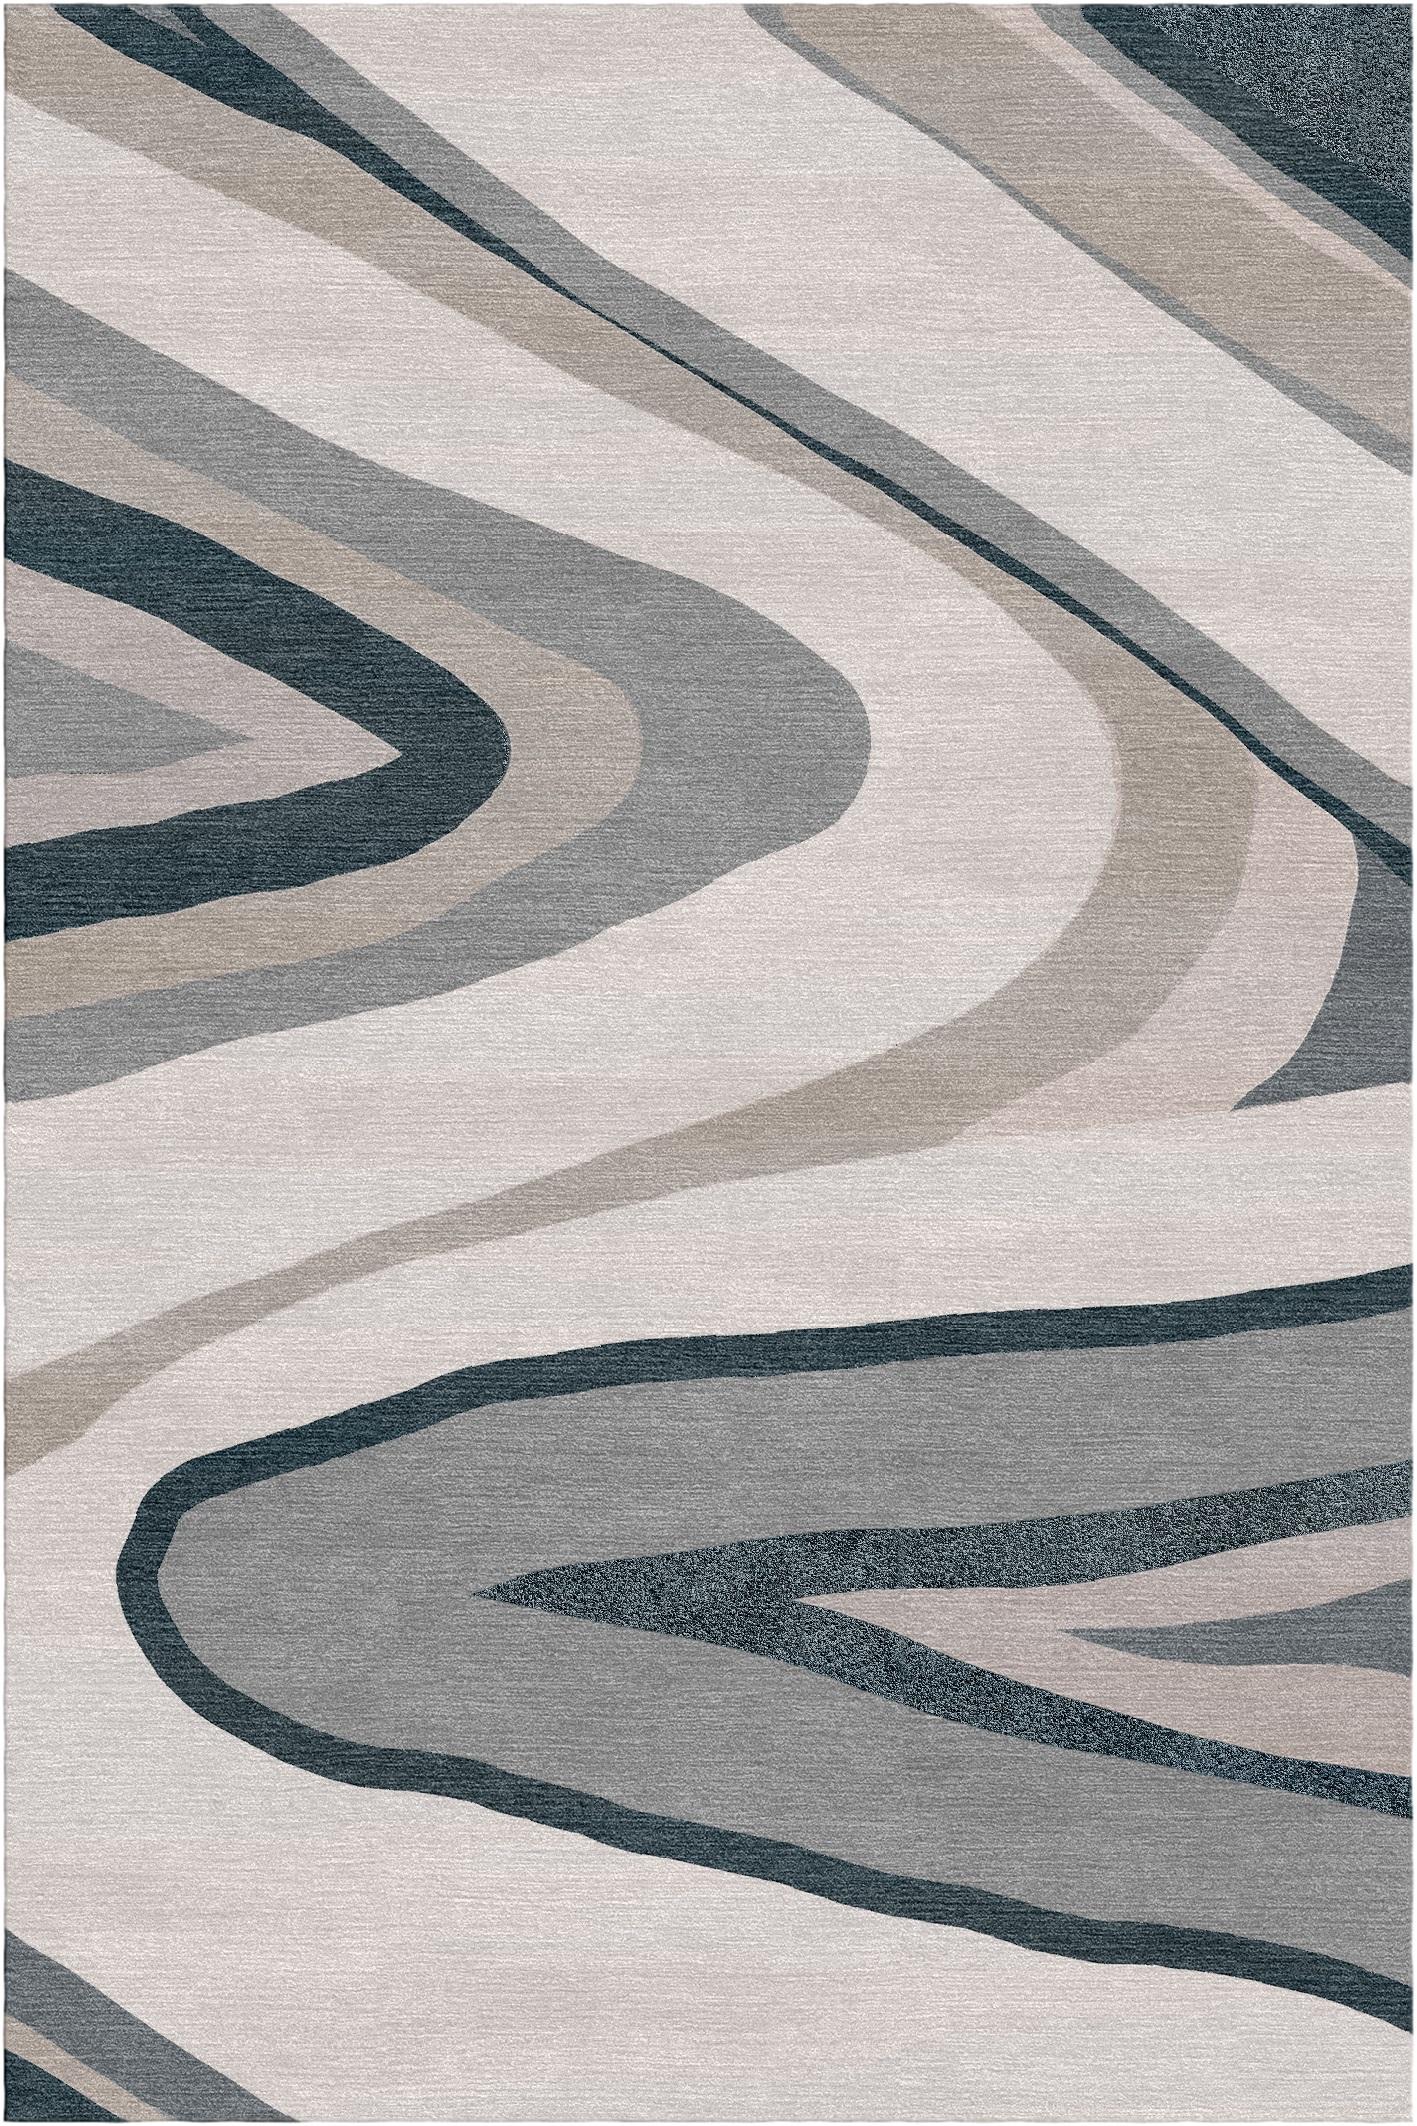 Pietra rug I by Giulio Brambilla.
Dimensions: D 300 x W 200 x H 1.5 cm.
Materials: NZ wool, bamboo silk.
Available in other colors.

A captivating design by architect and designer Giulio Brambilla, this rug flaunts an abstract decoration